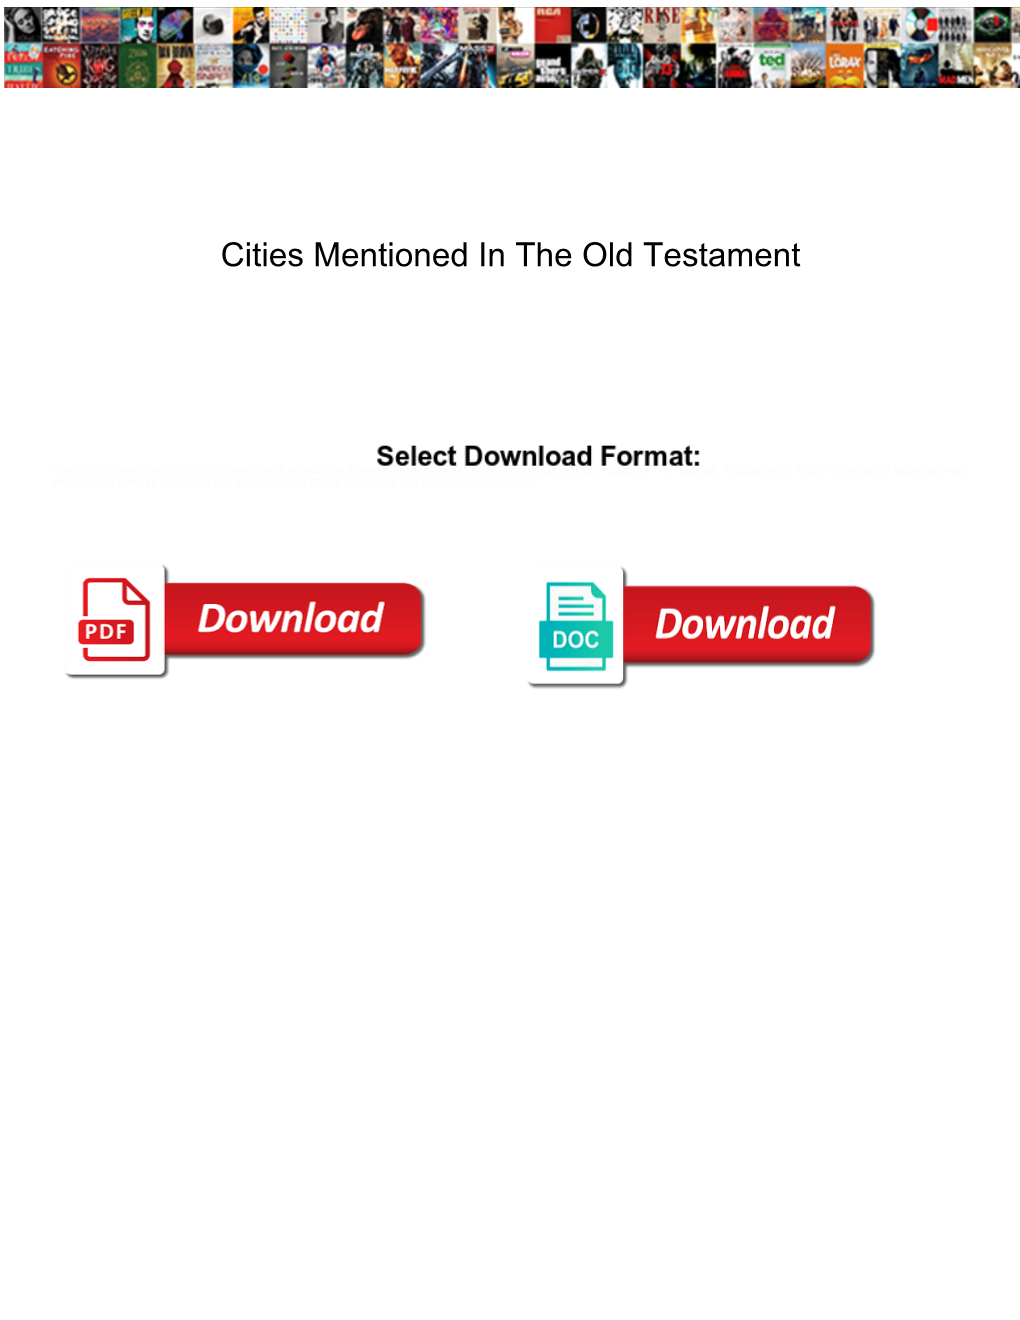 Cities Mentioned in the Old Testament